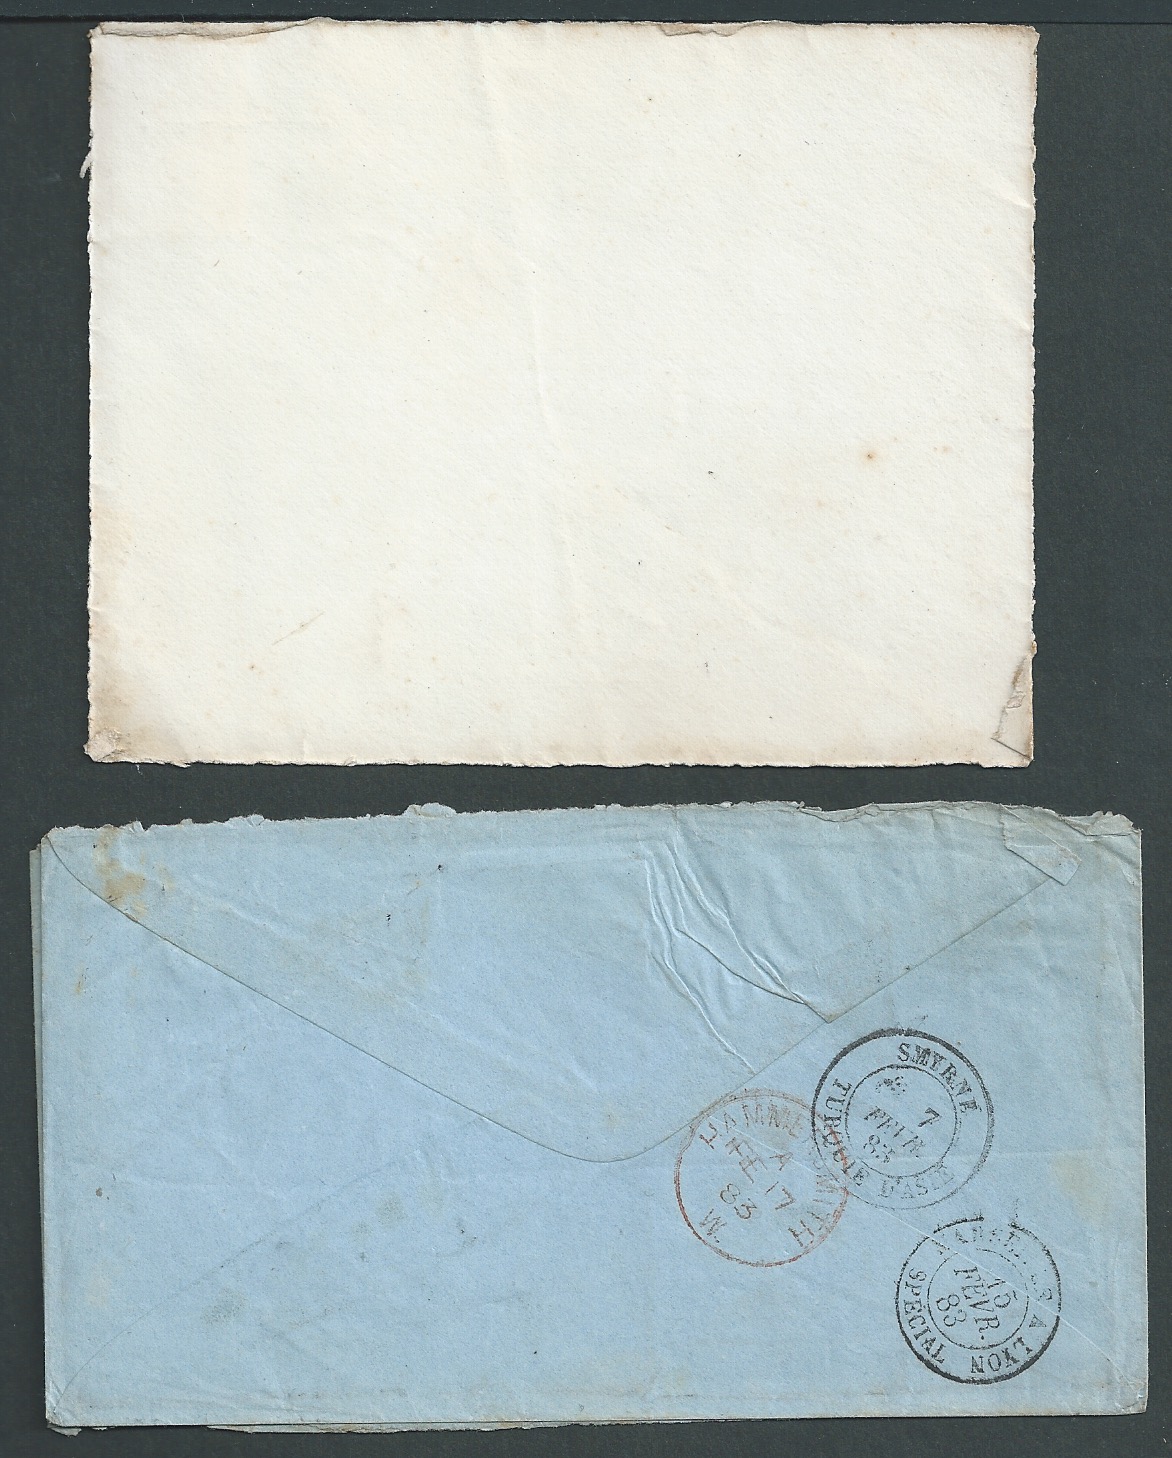 Syria 1883 Two covers franked France 25c cancelled by "LATAQUIE / SYRIE" French P.O. c..d.s. and a f - Image 2 of 2